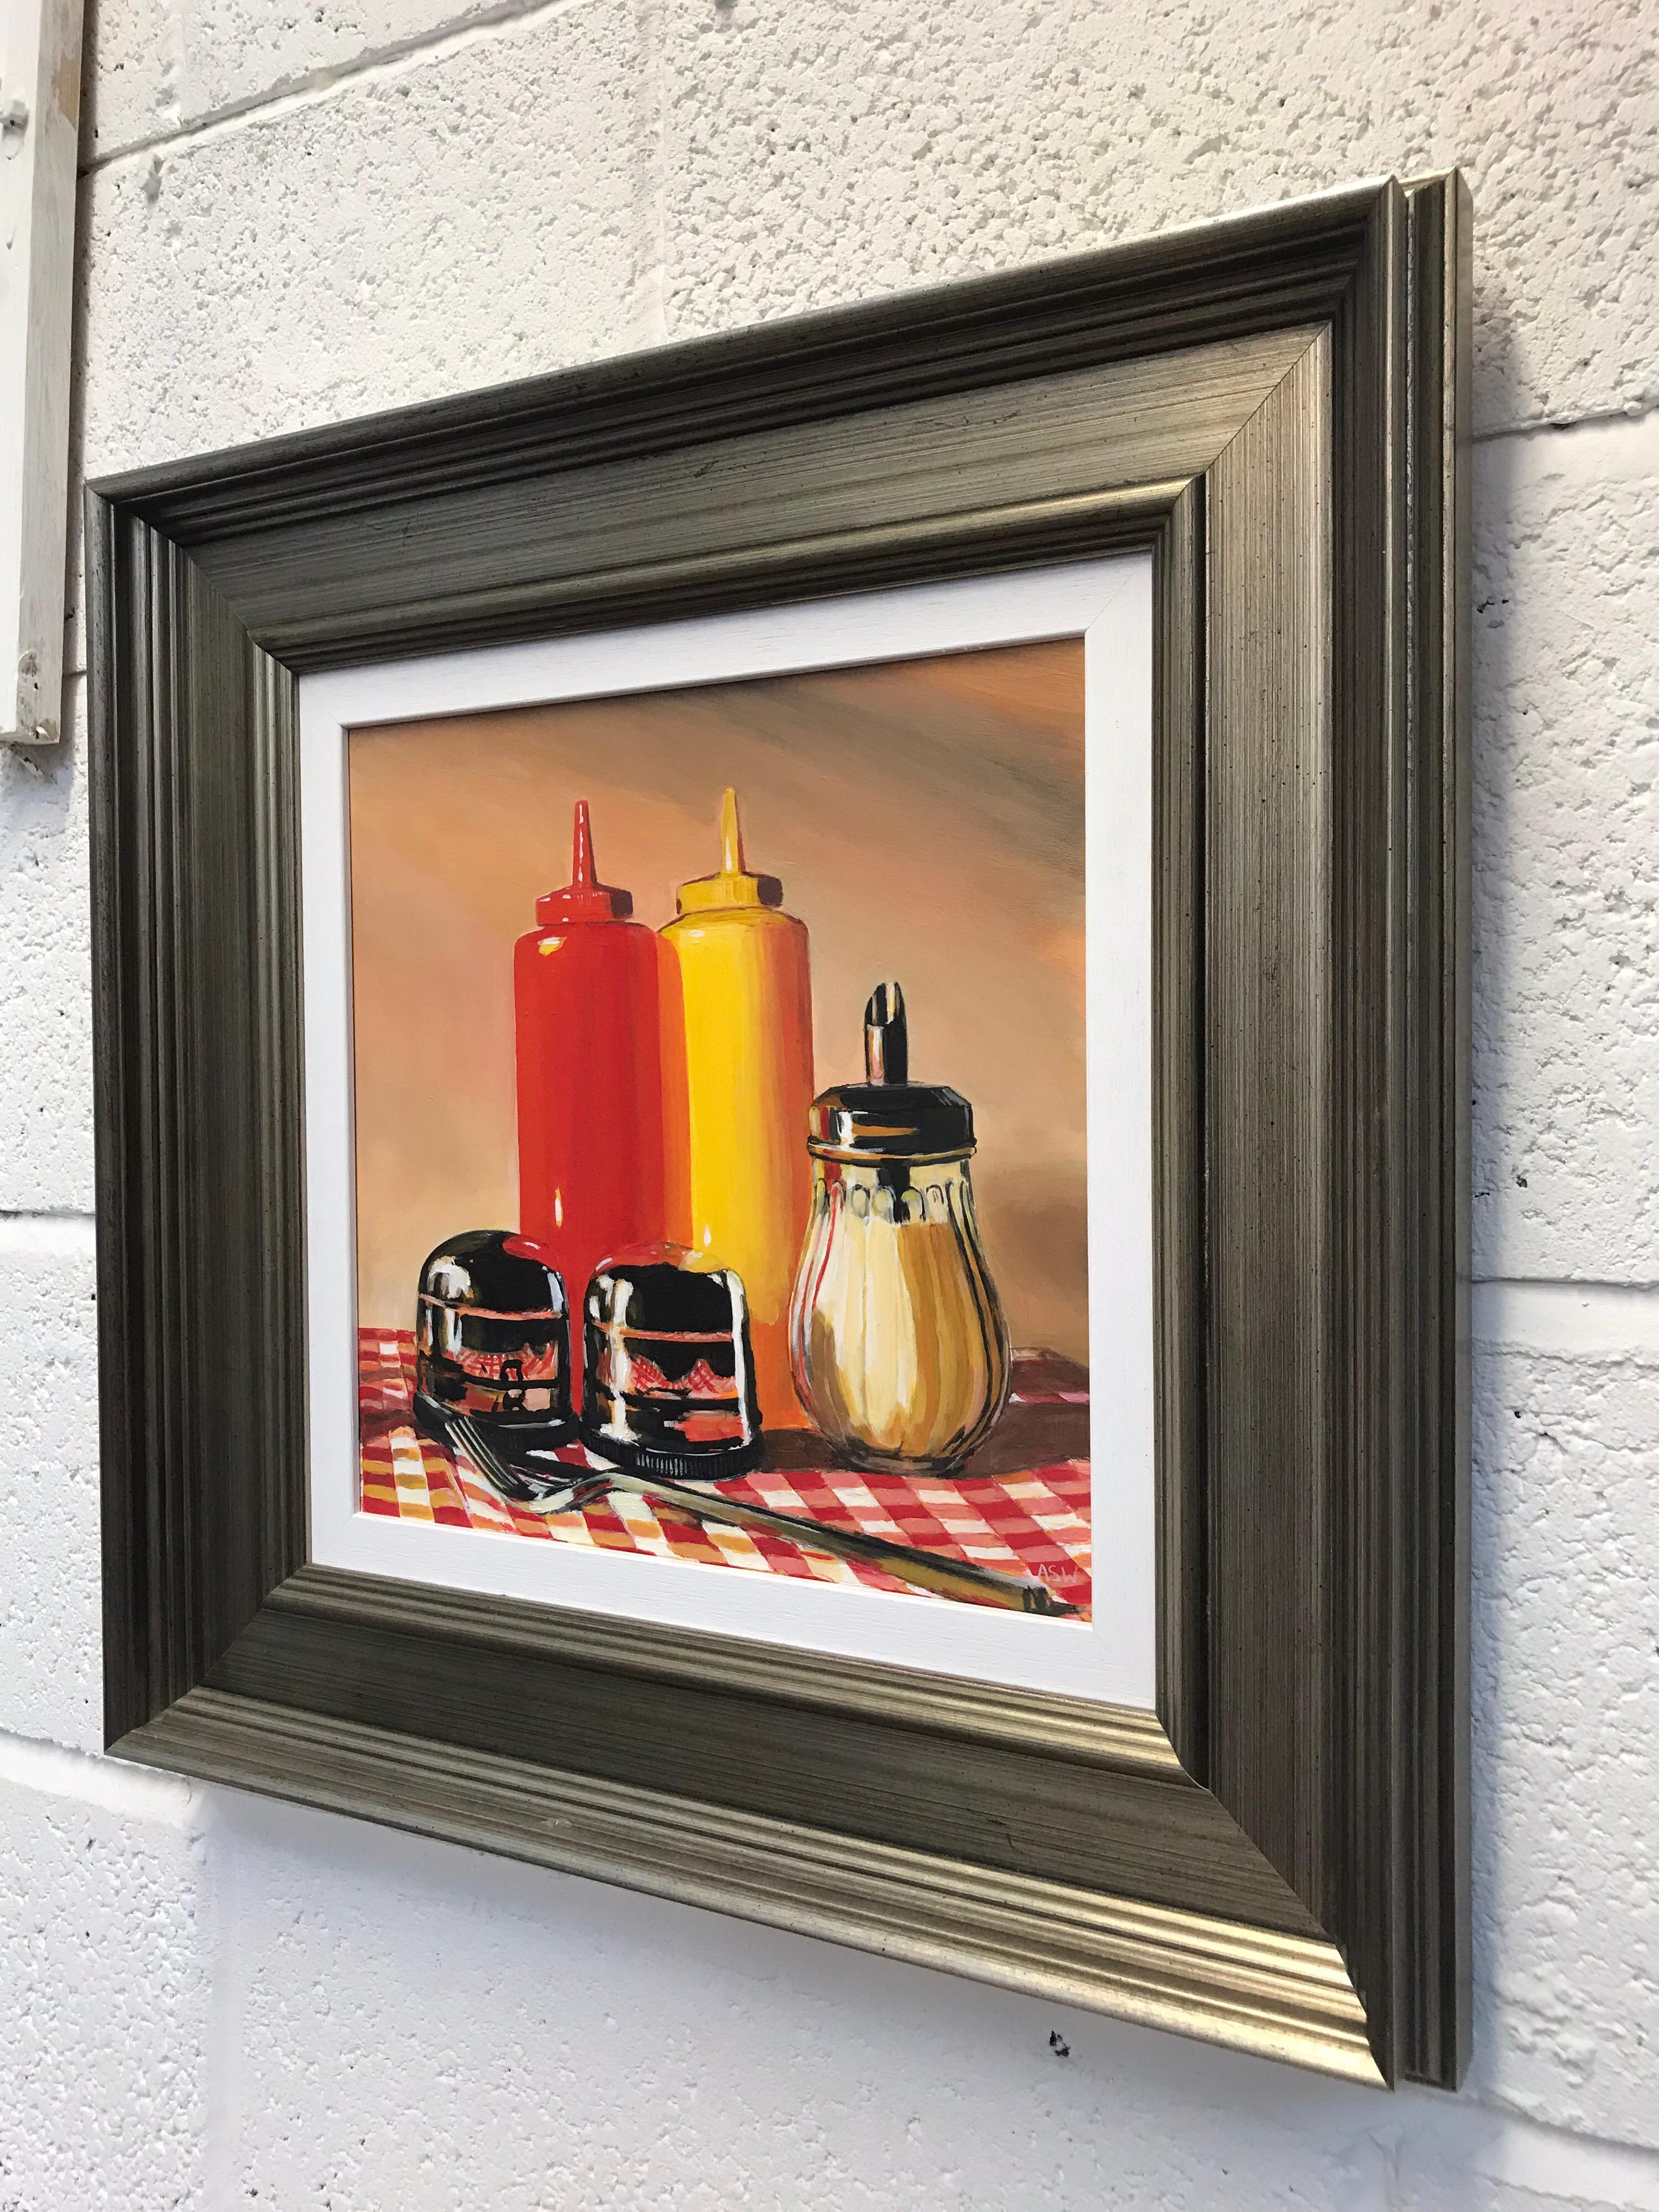 Americana Still Life Painting of New York Diner by Leading British Urban Artist.

Art measures 12 x 12 inches
Frame measures 19 x 19 inches

Angela Wakefield has twice been on the front cover of ‘Art of England’ and featured in ARTnews, attracting